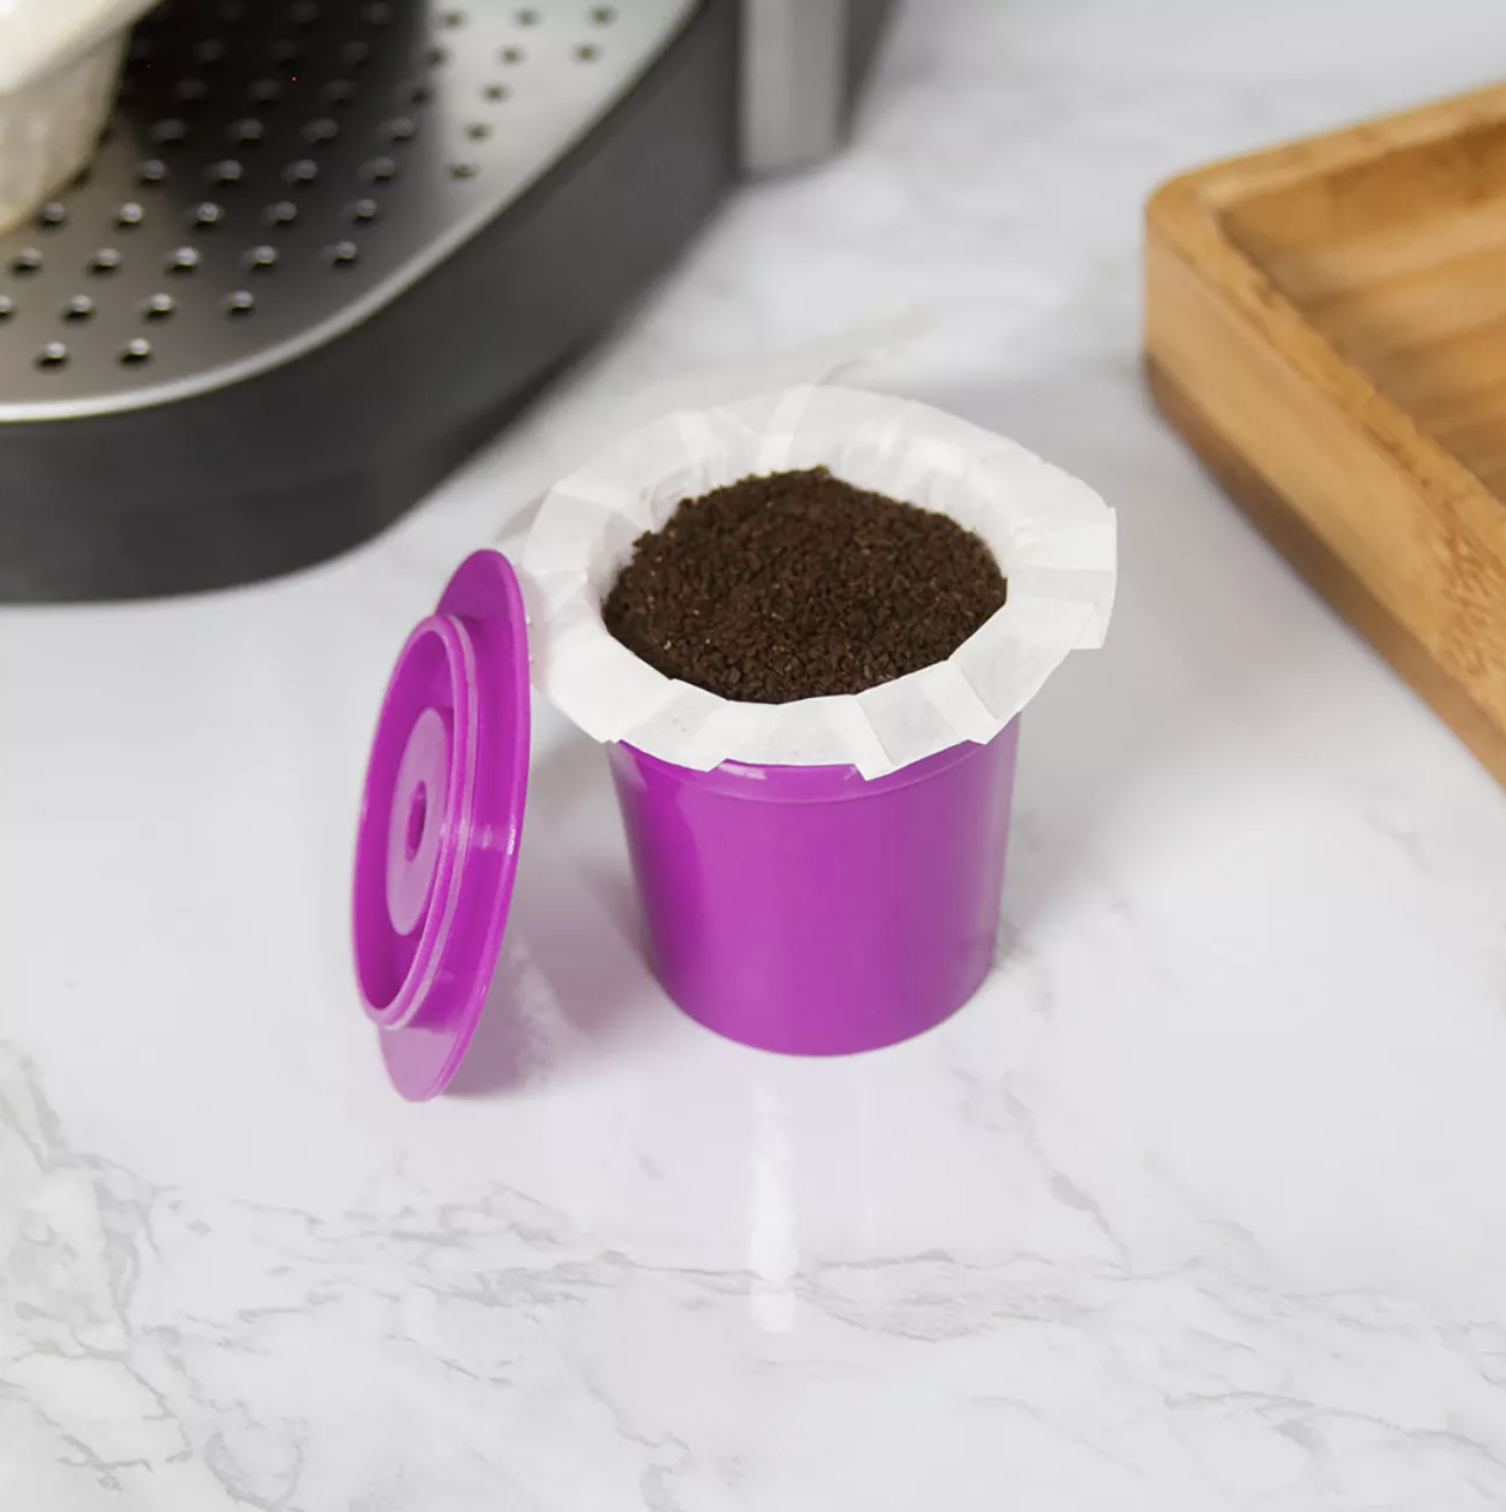 the purple single serve cup with a filter and coffee in it